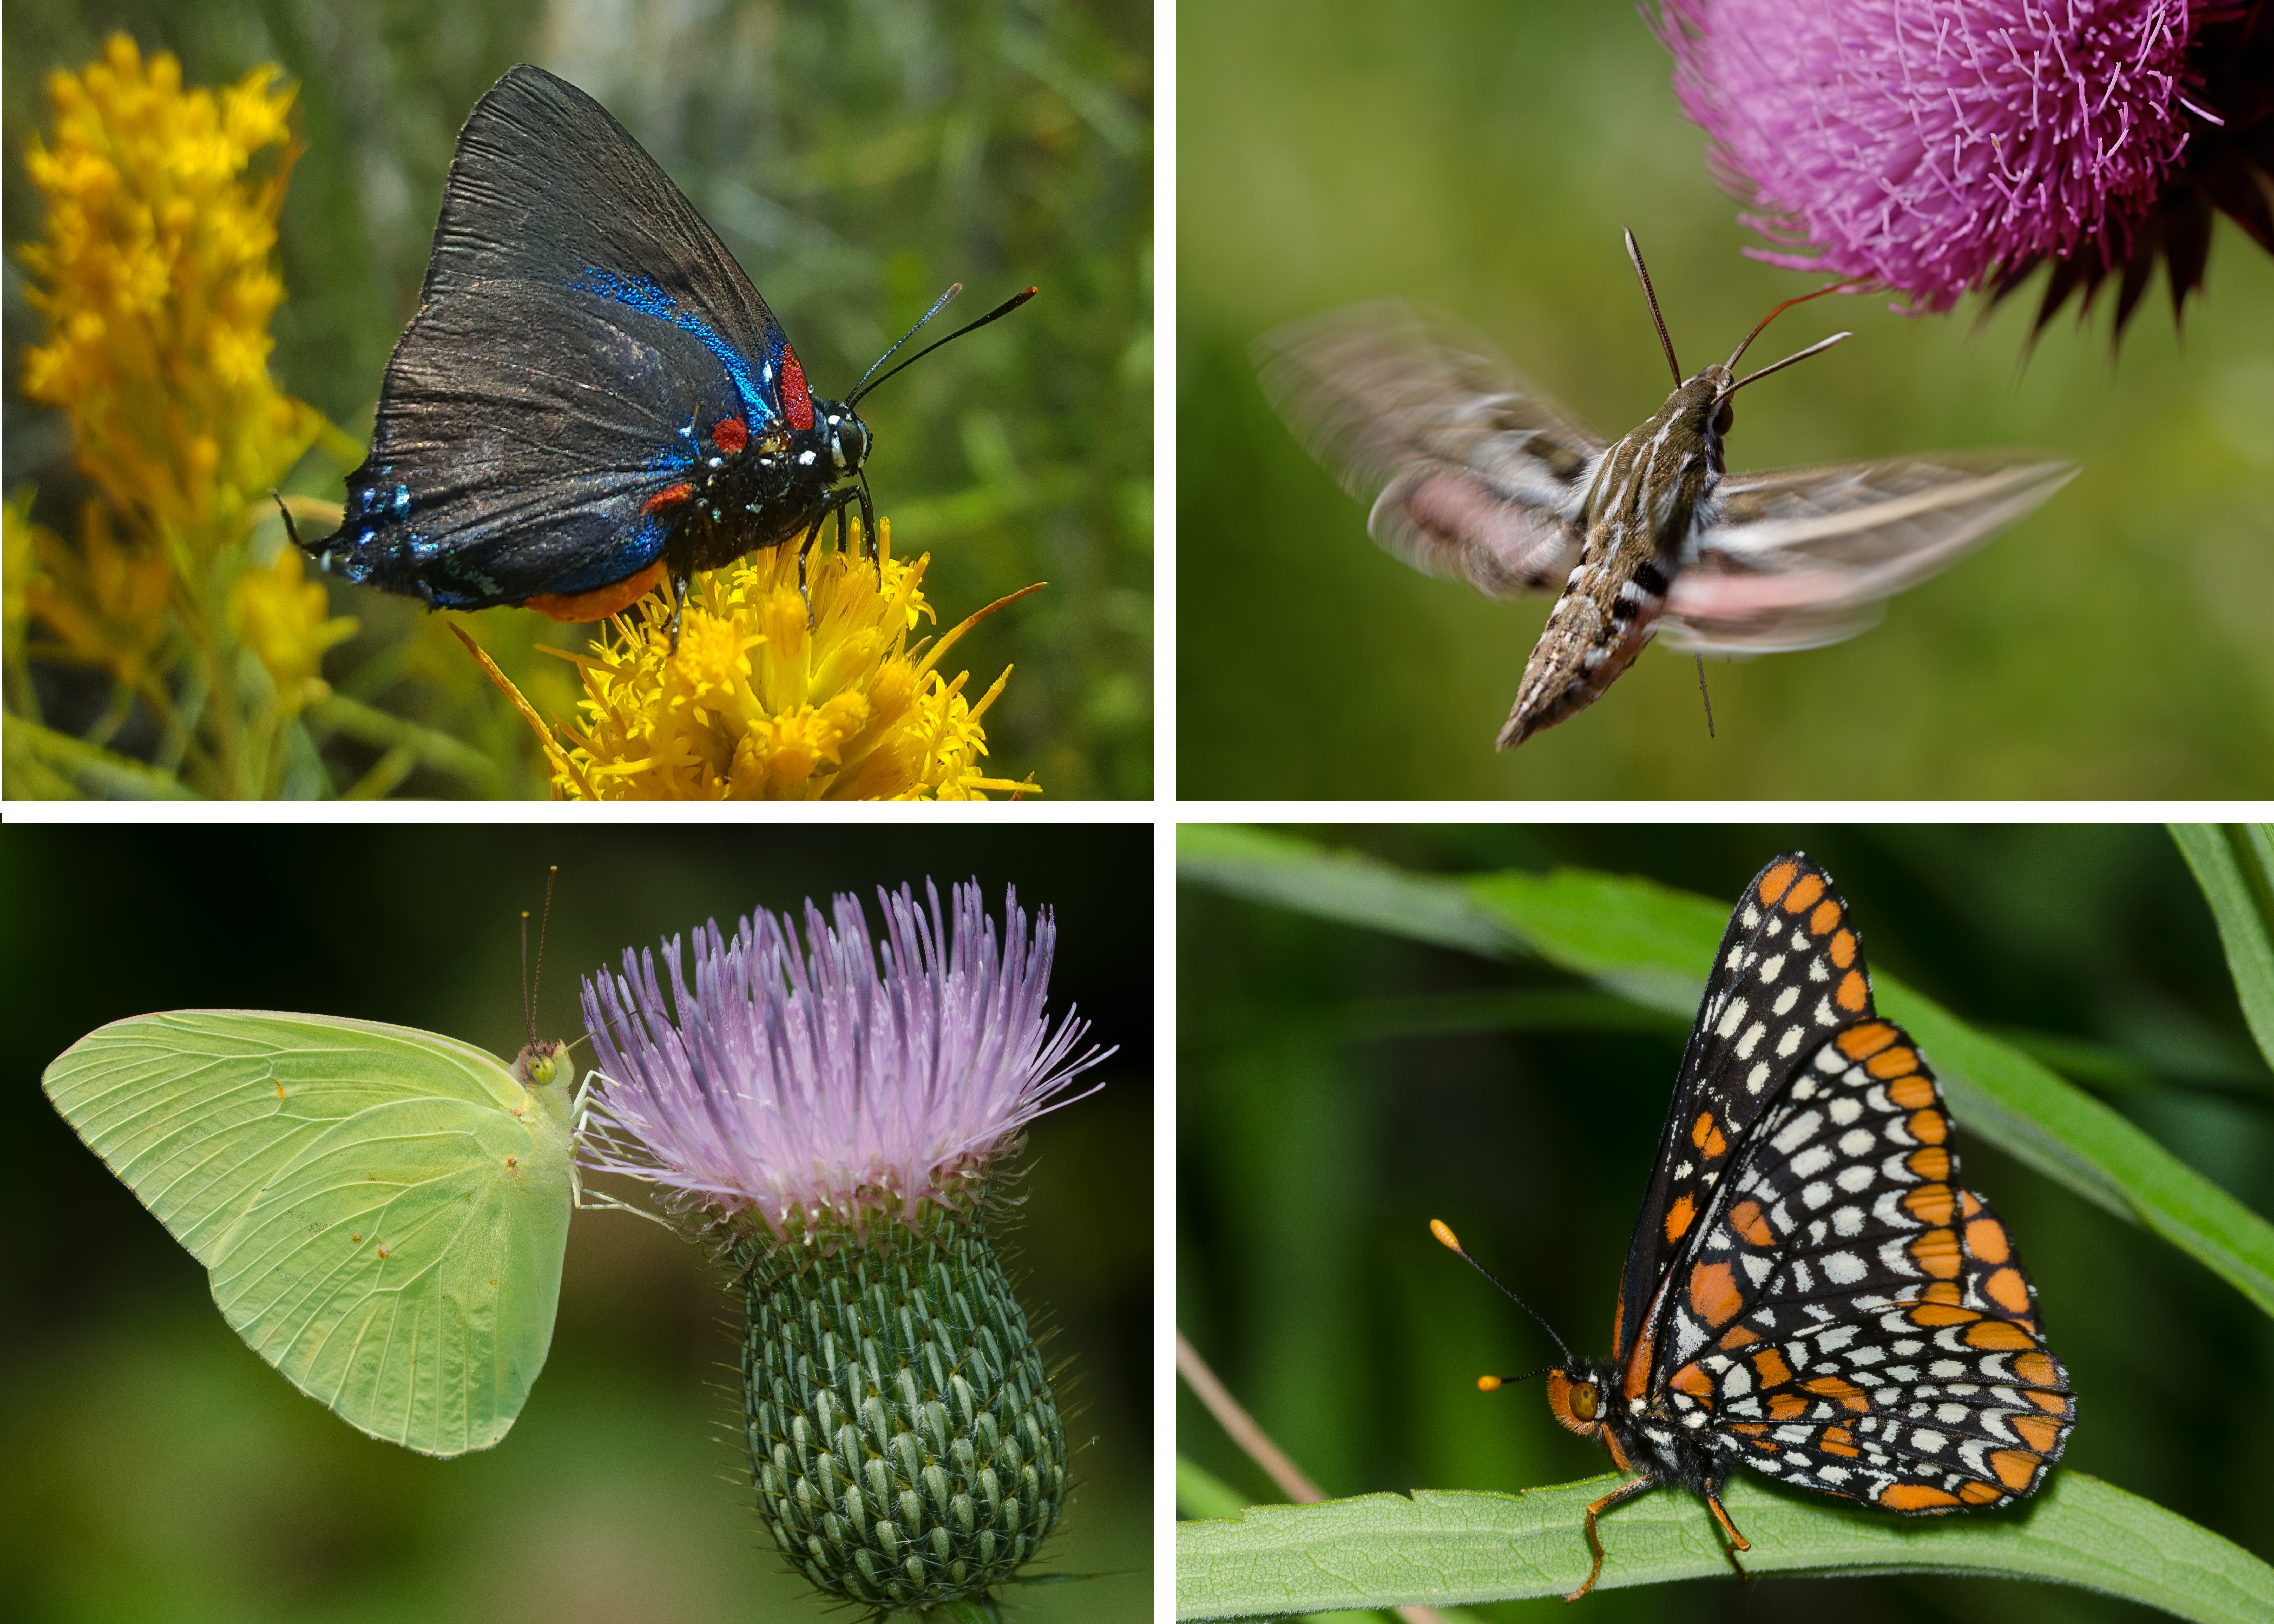 An assortment of colorful images of butterflies and moths demonstrates the diversity within Lepidoptera.